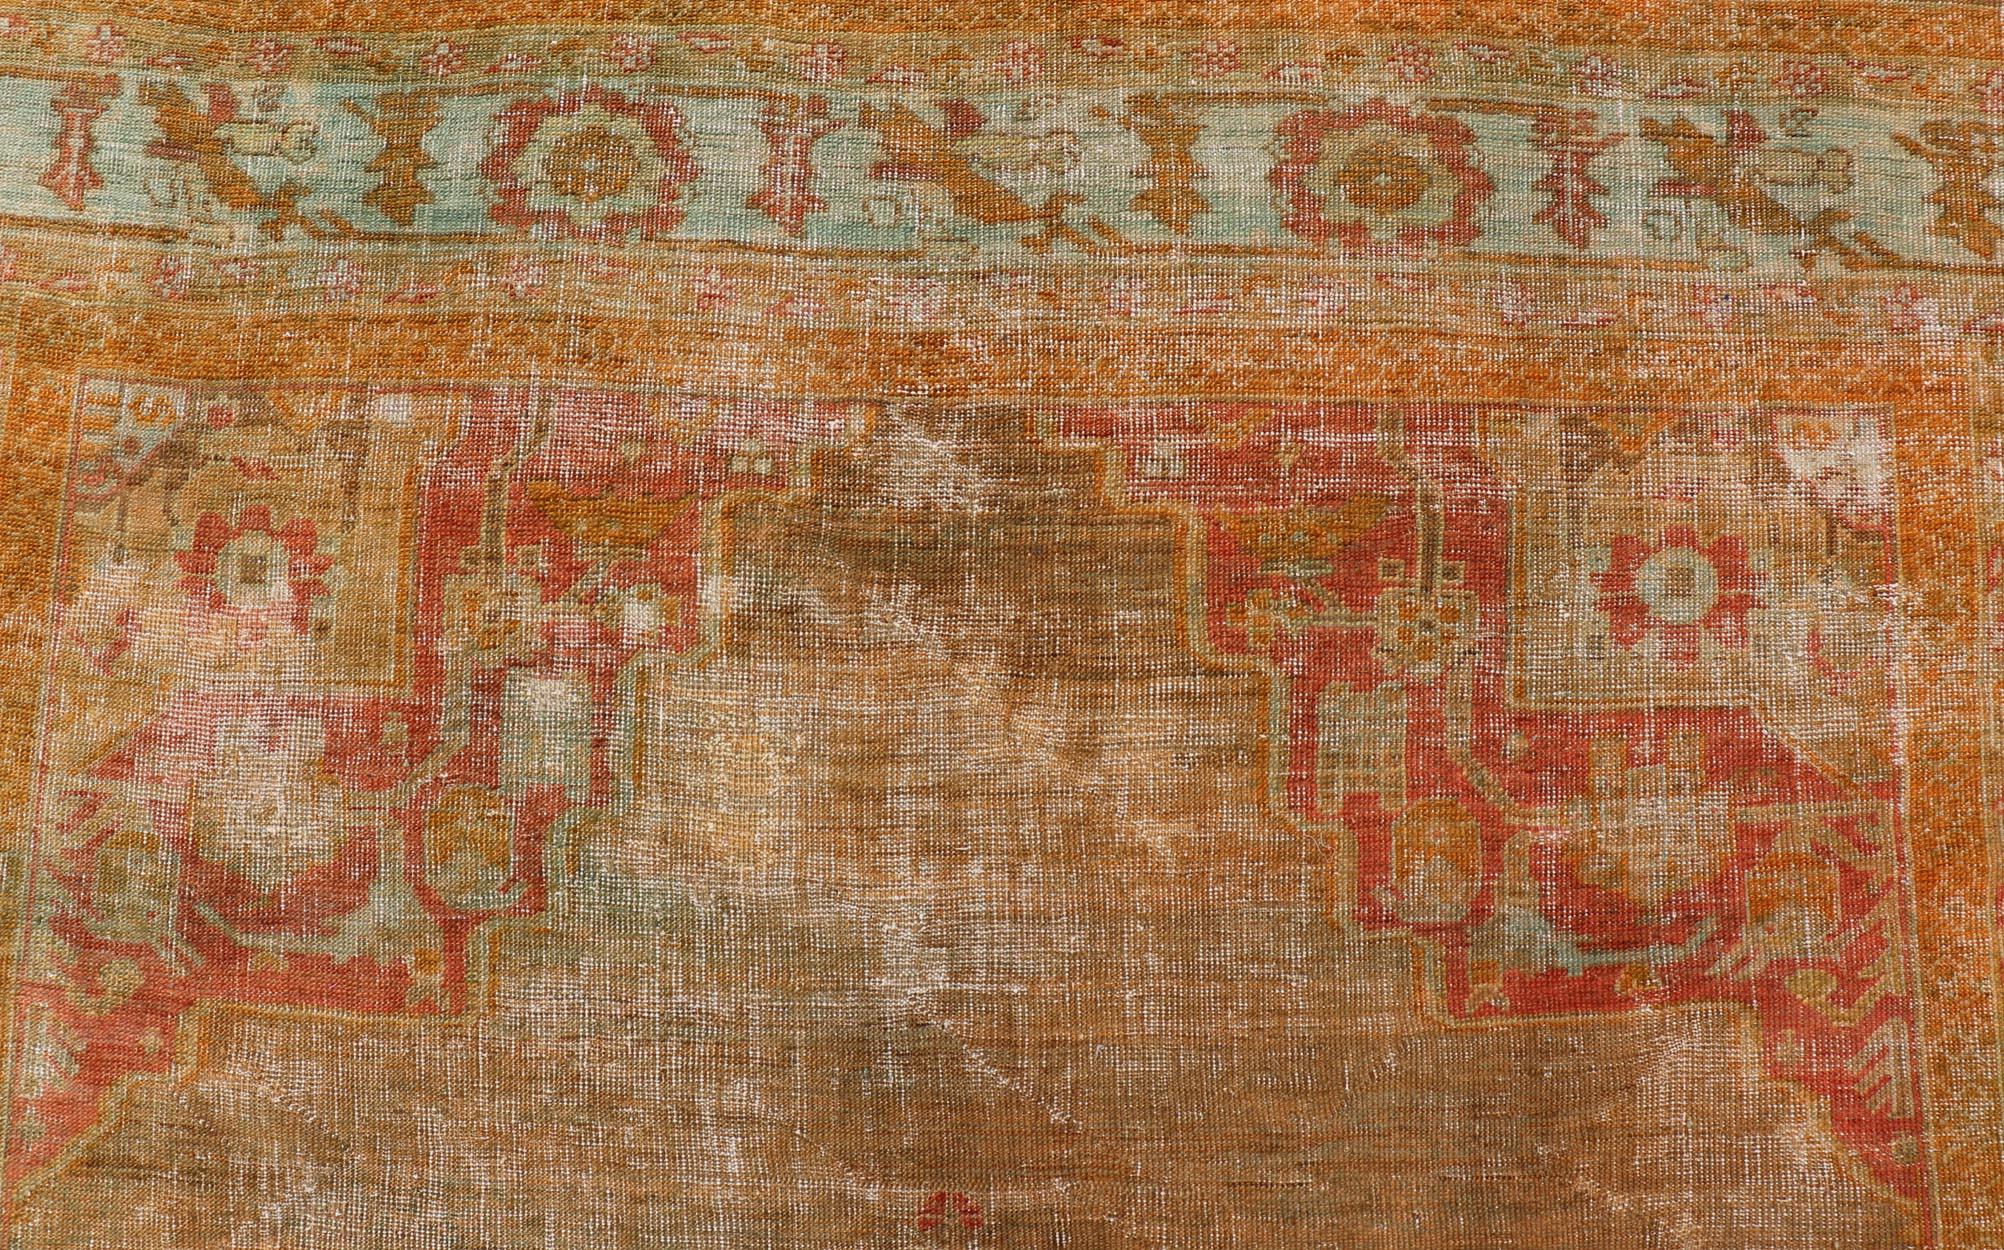  Antique Turkish Oushak With Medallion in green, Coral, L. Blue & Marigold. Keivan Woven Arts / rug / R20-1015, country of origin / type: Turkey / Oushak, circa 1900

Measures: 8'10 x 12'4 

This diverse and beautiful 1900's antique Oushak with